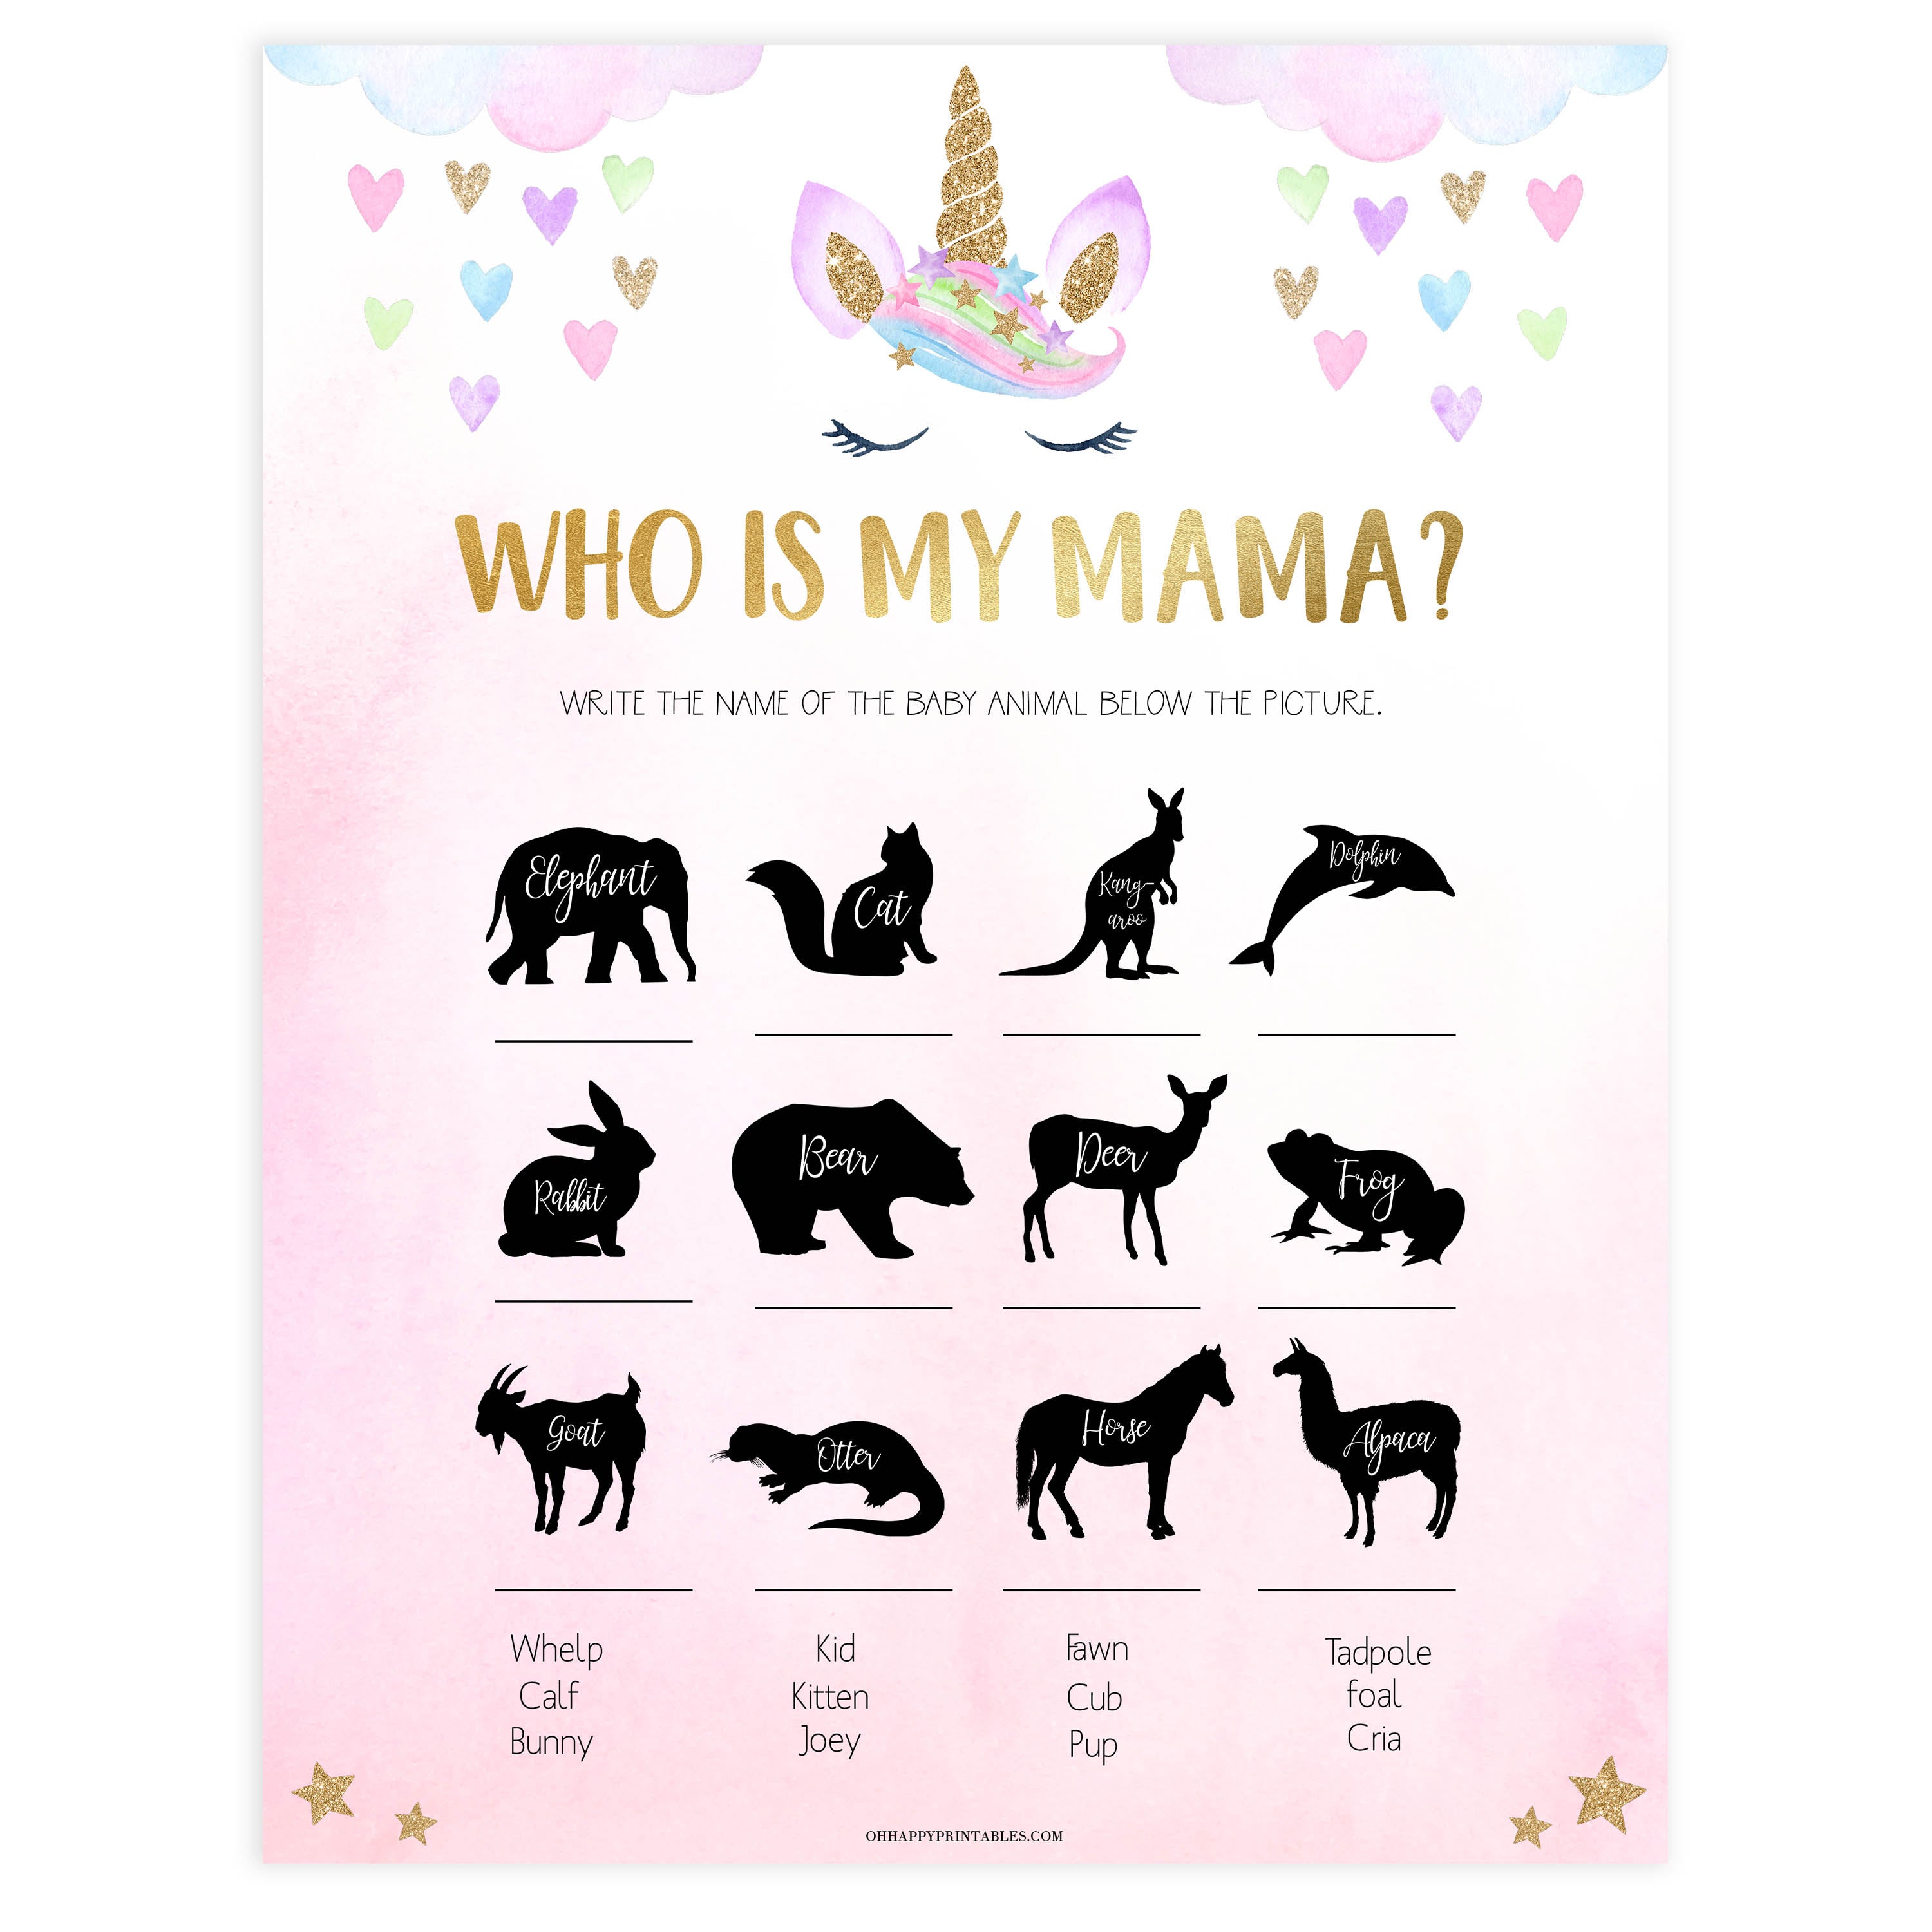 who is my mama baby game, Printable baby shower games, unicorn baby games, baby shower games, fun baby shower ideas, top baby shower ideas, unicorn baby shower, baby shower games, fun unicorn baby shower ideas